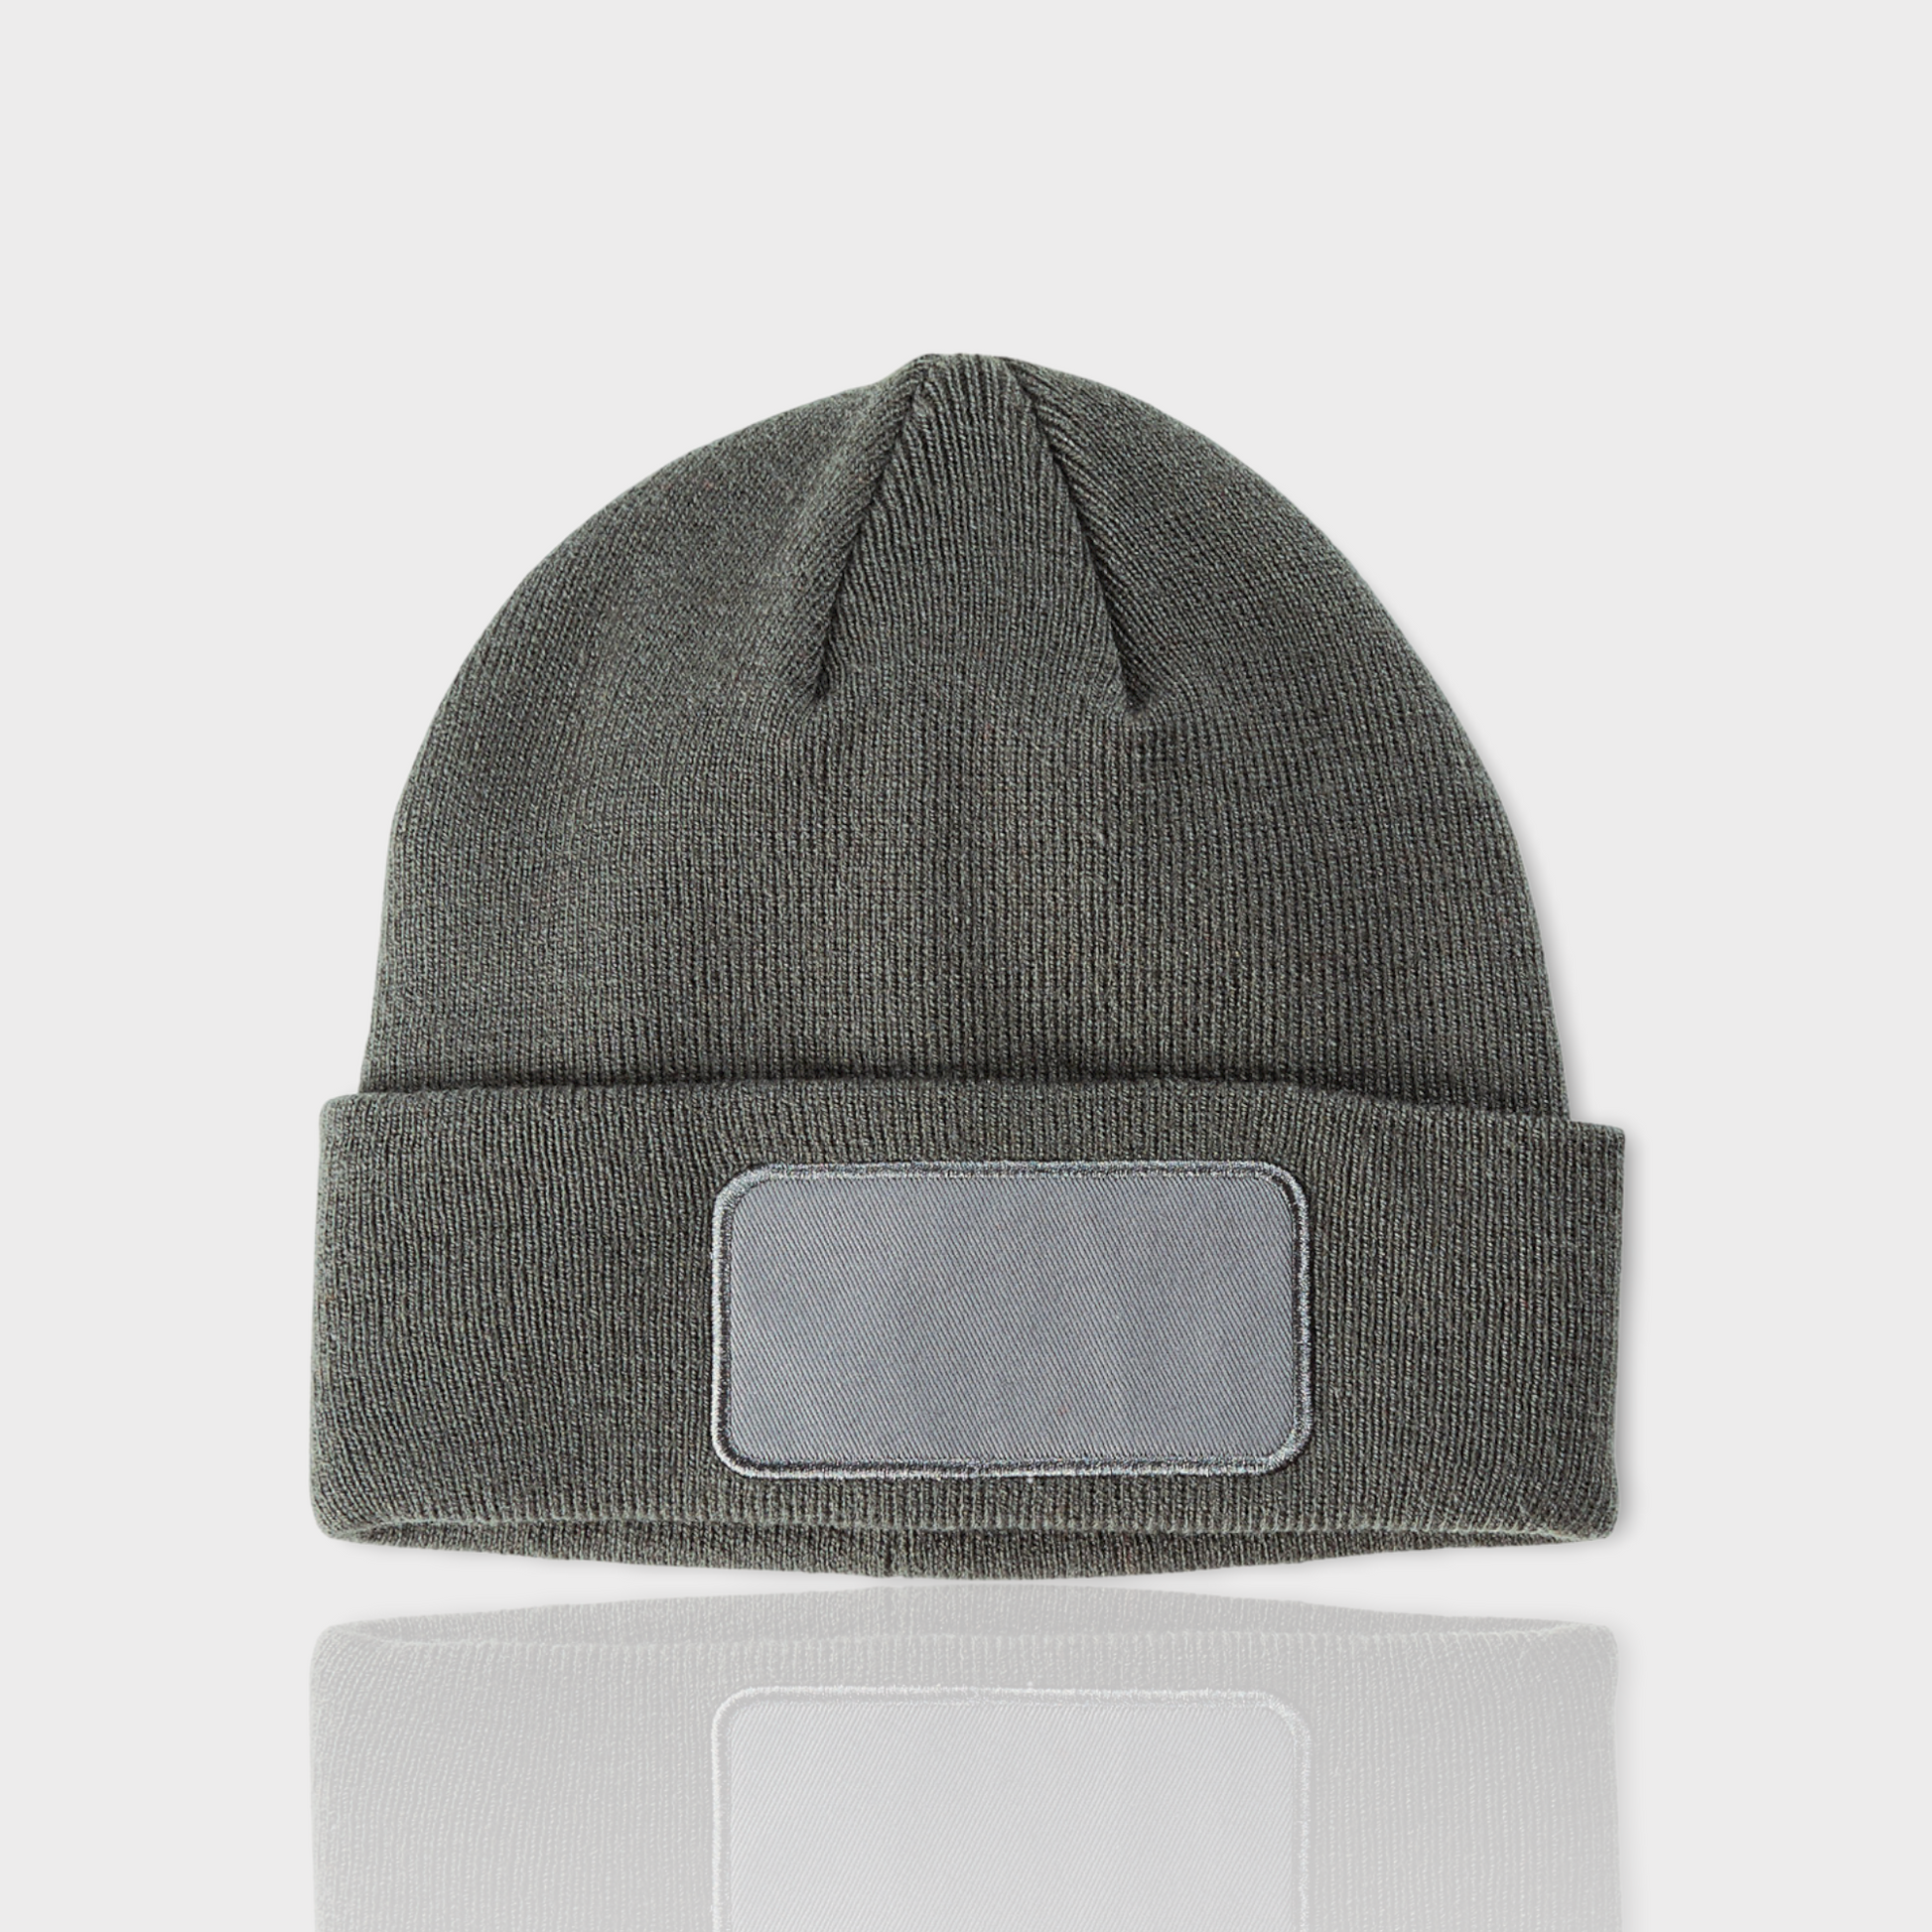 LINEAGE ESSENTIAL BEANIE - DEEP GRAY - Lineage Athletics